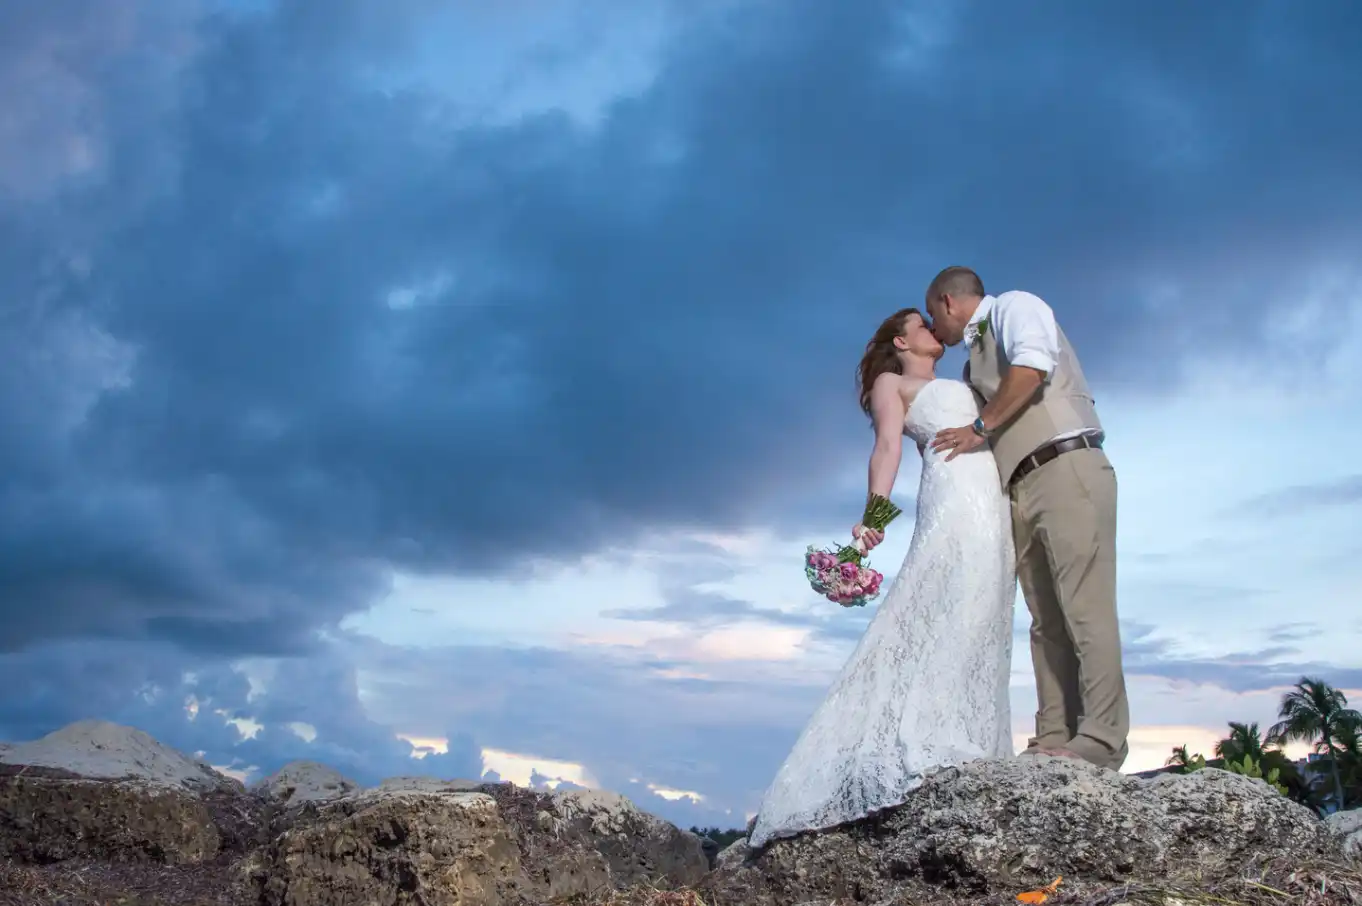 A key west bride and groom kissing on rocks in front of a cloudy sky.